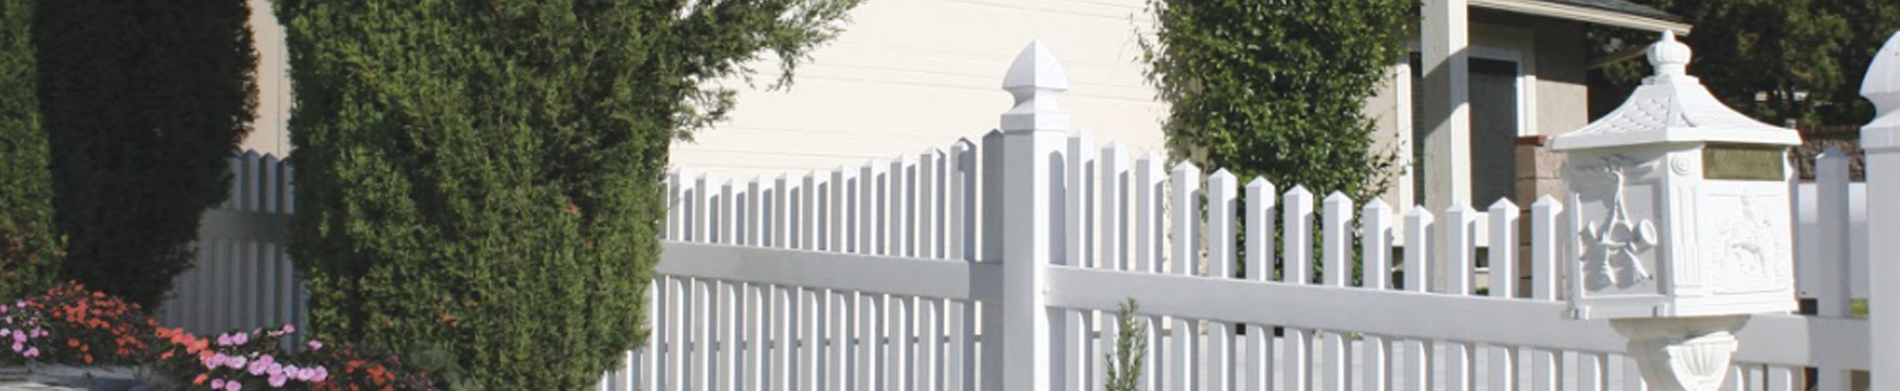 Vinyl fences are extremely popular among homeowners in the USA